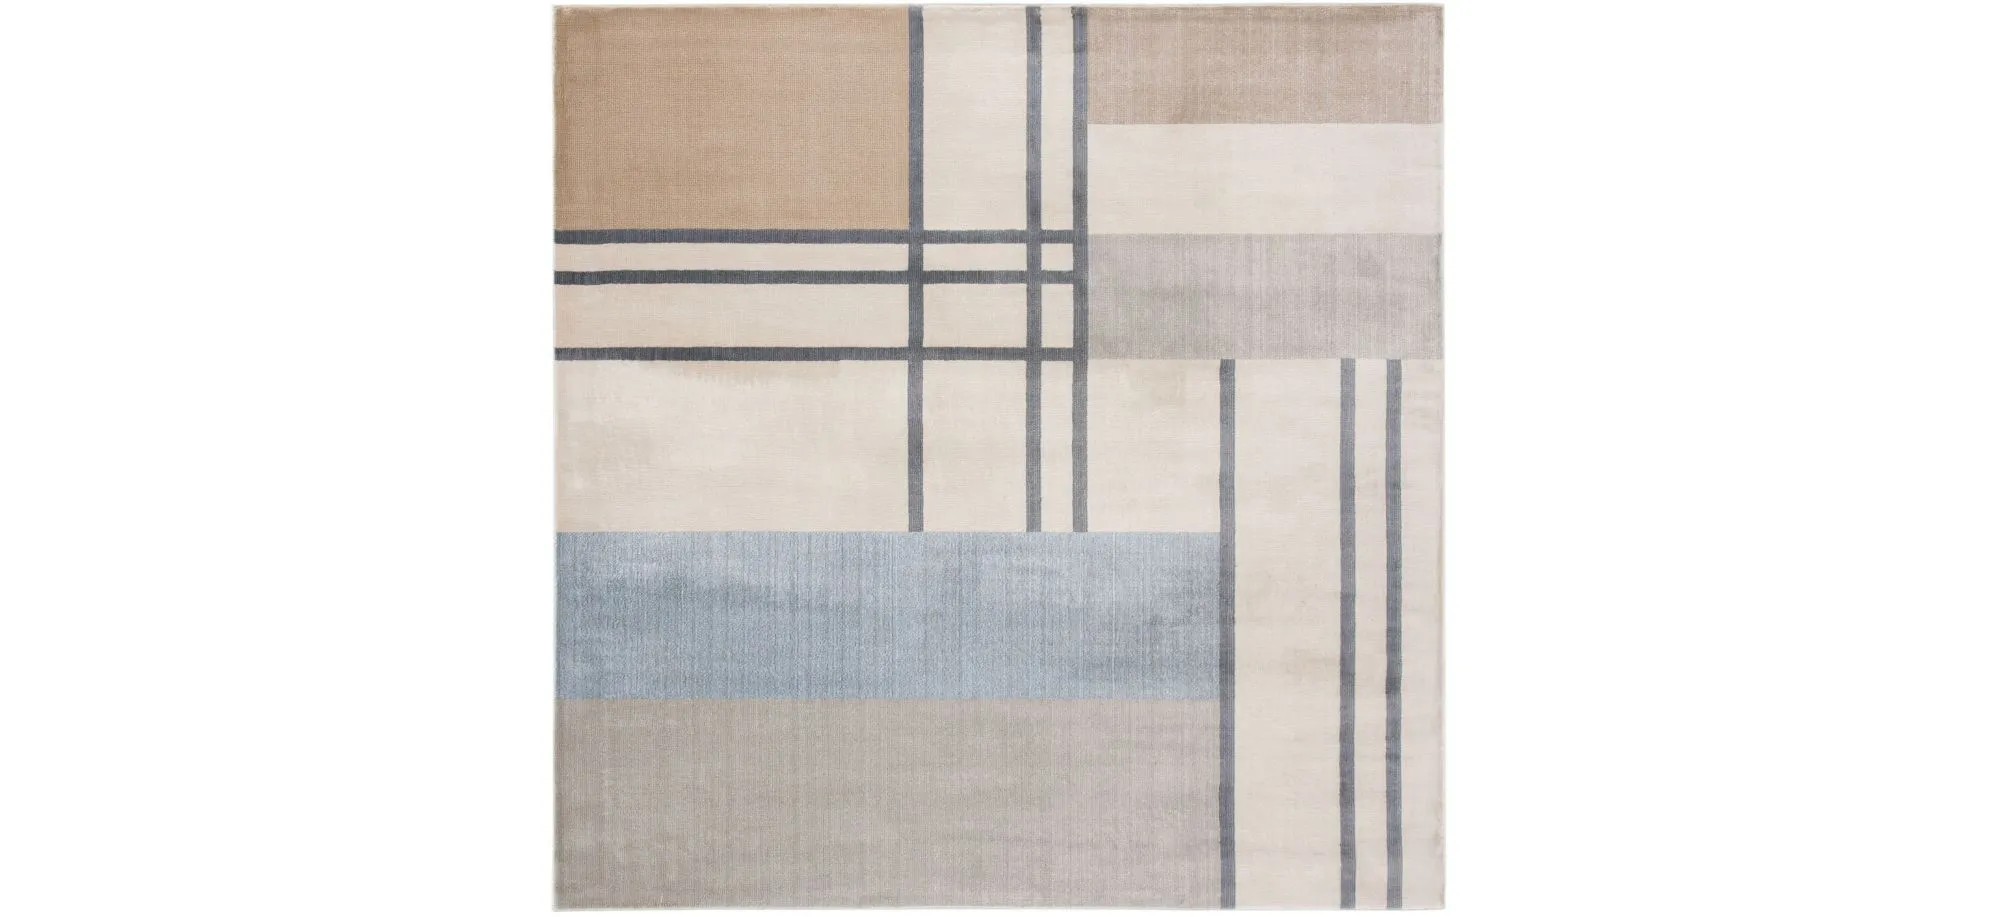 Orianthi Square Area Rug in Ivory/Taupe by Safavieh